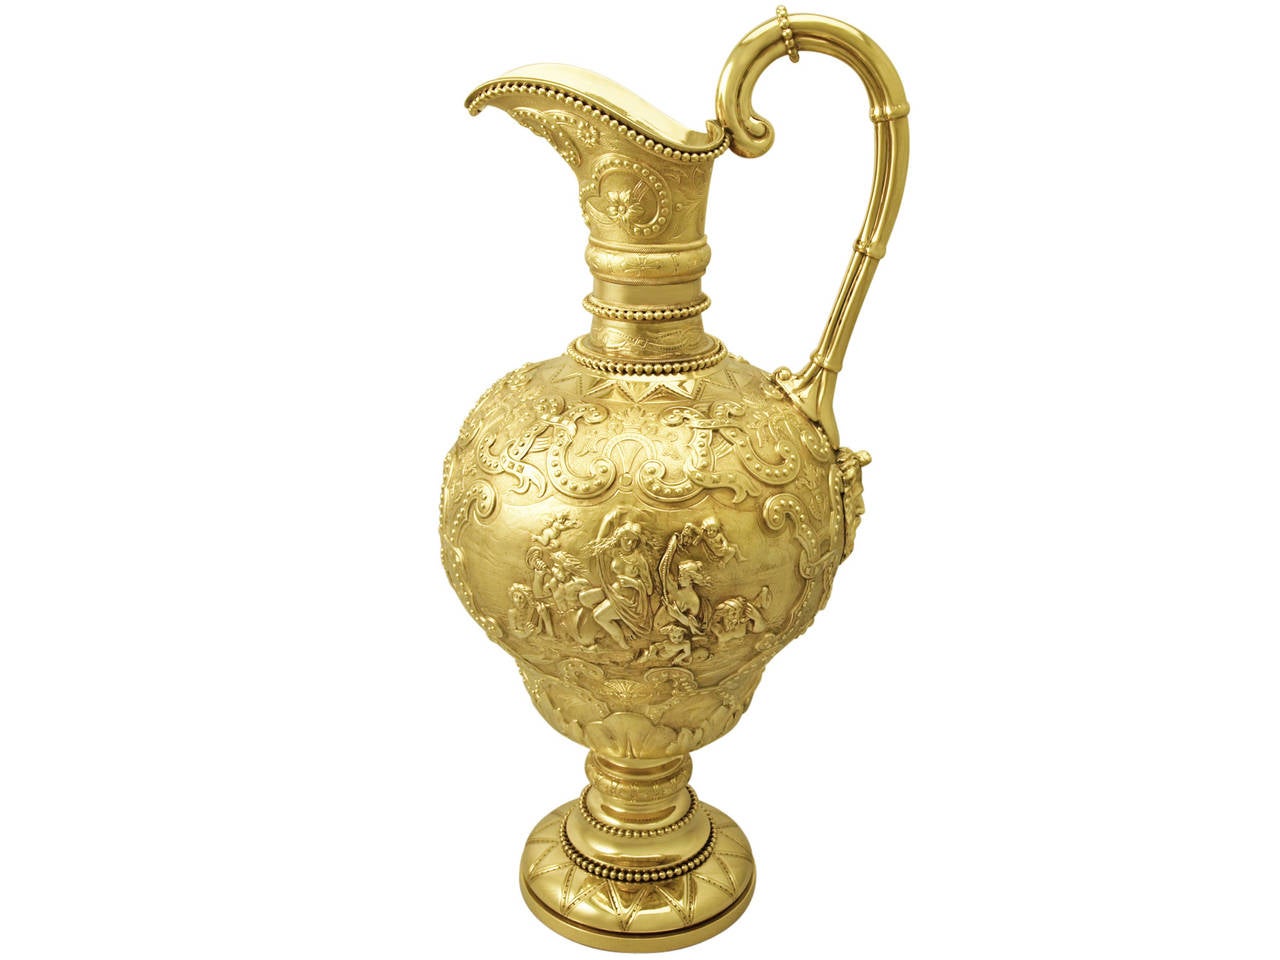 A magnificent and important, fine and impressive large antique George V English 9 carat yellow gold claret jug; an addition to the diverse wine and drink related collection.

This impressive antique early George V English 9ct yellow gold jug has a